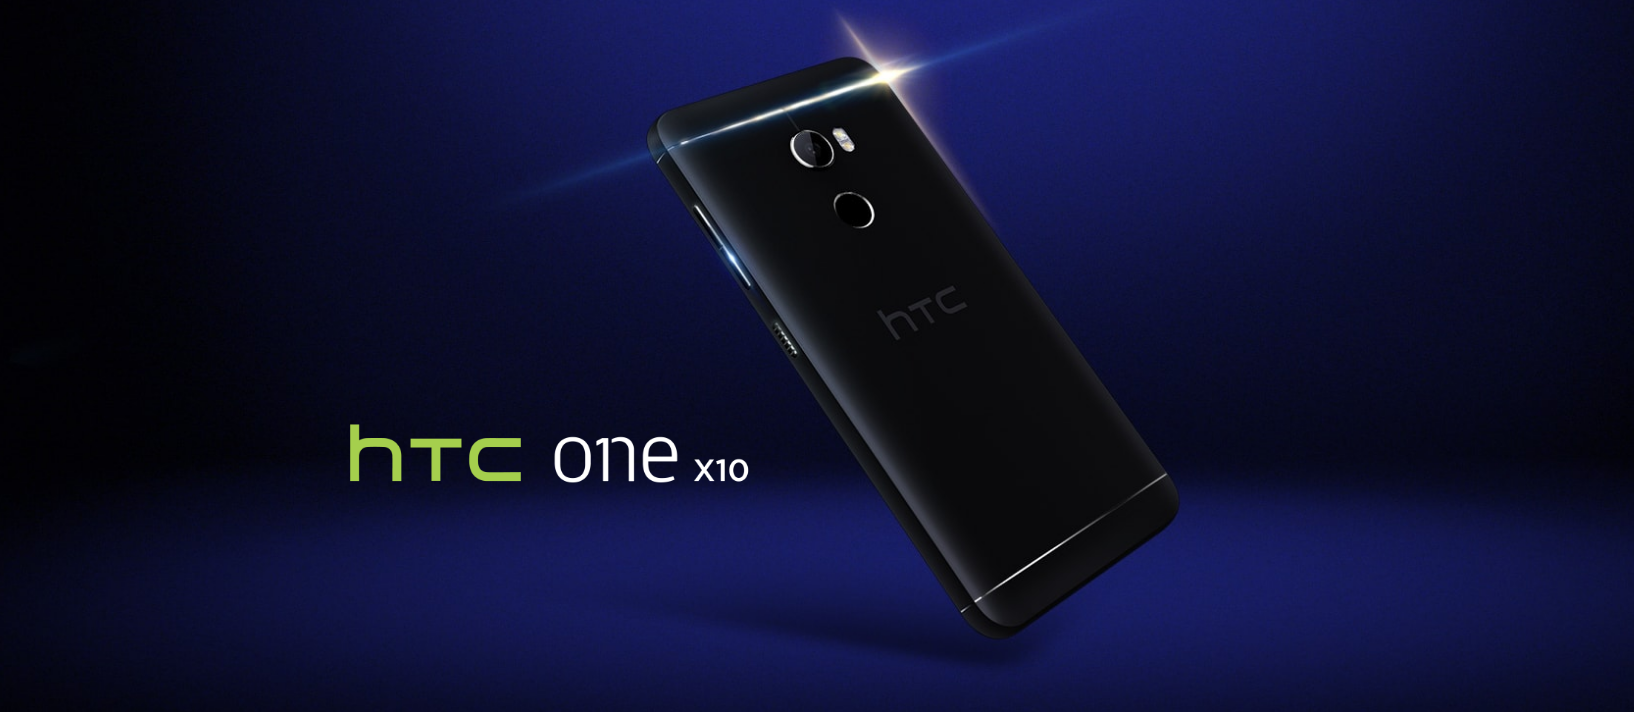 The HTC One X10 is now official in Russia - HTC One X10 mid-ranger is official in Russia; phone carries a 4000mAh battery (UPDATE)